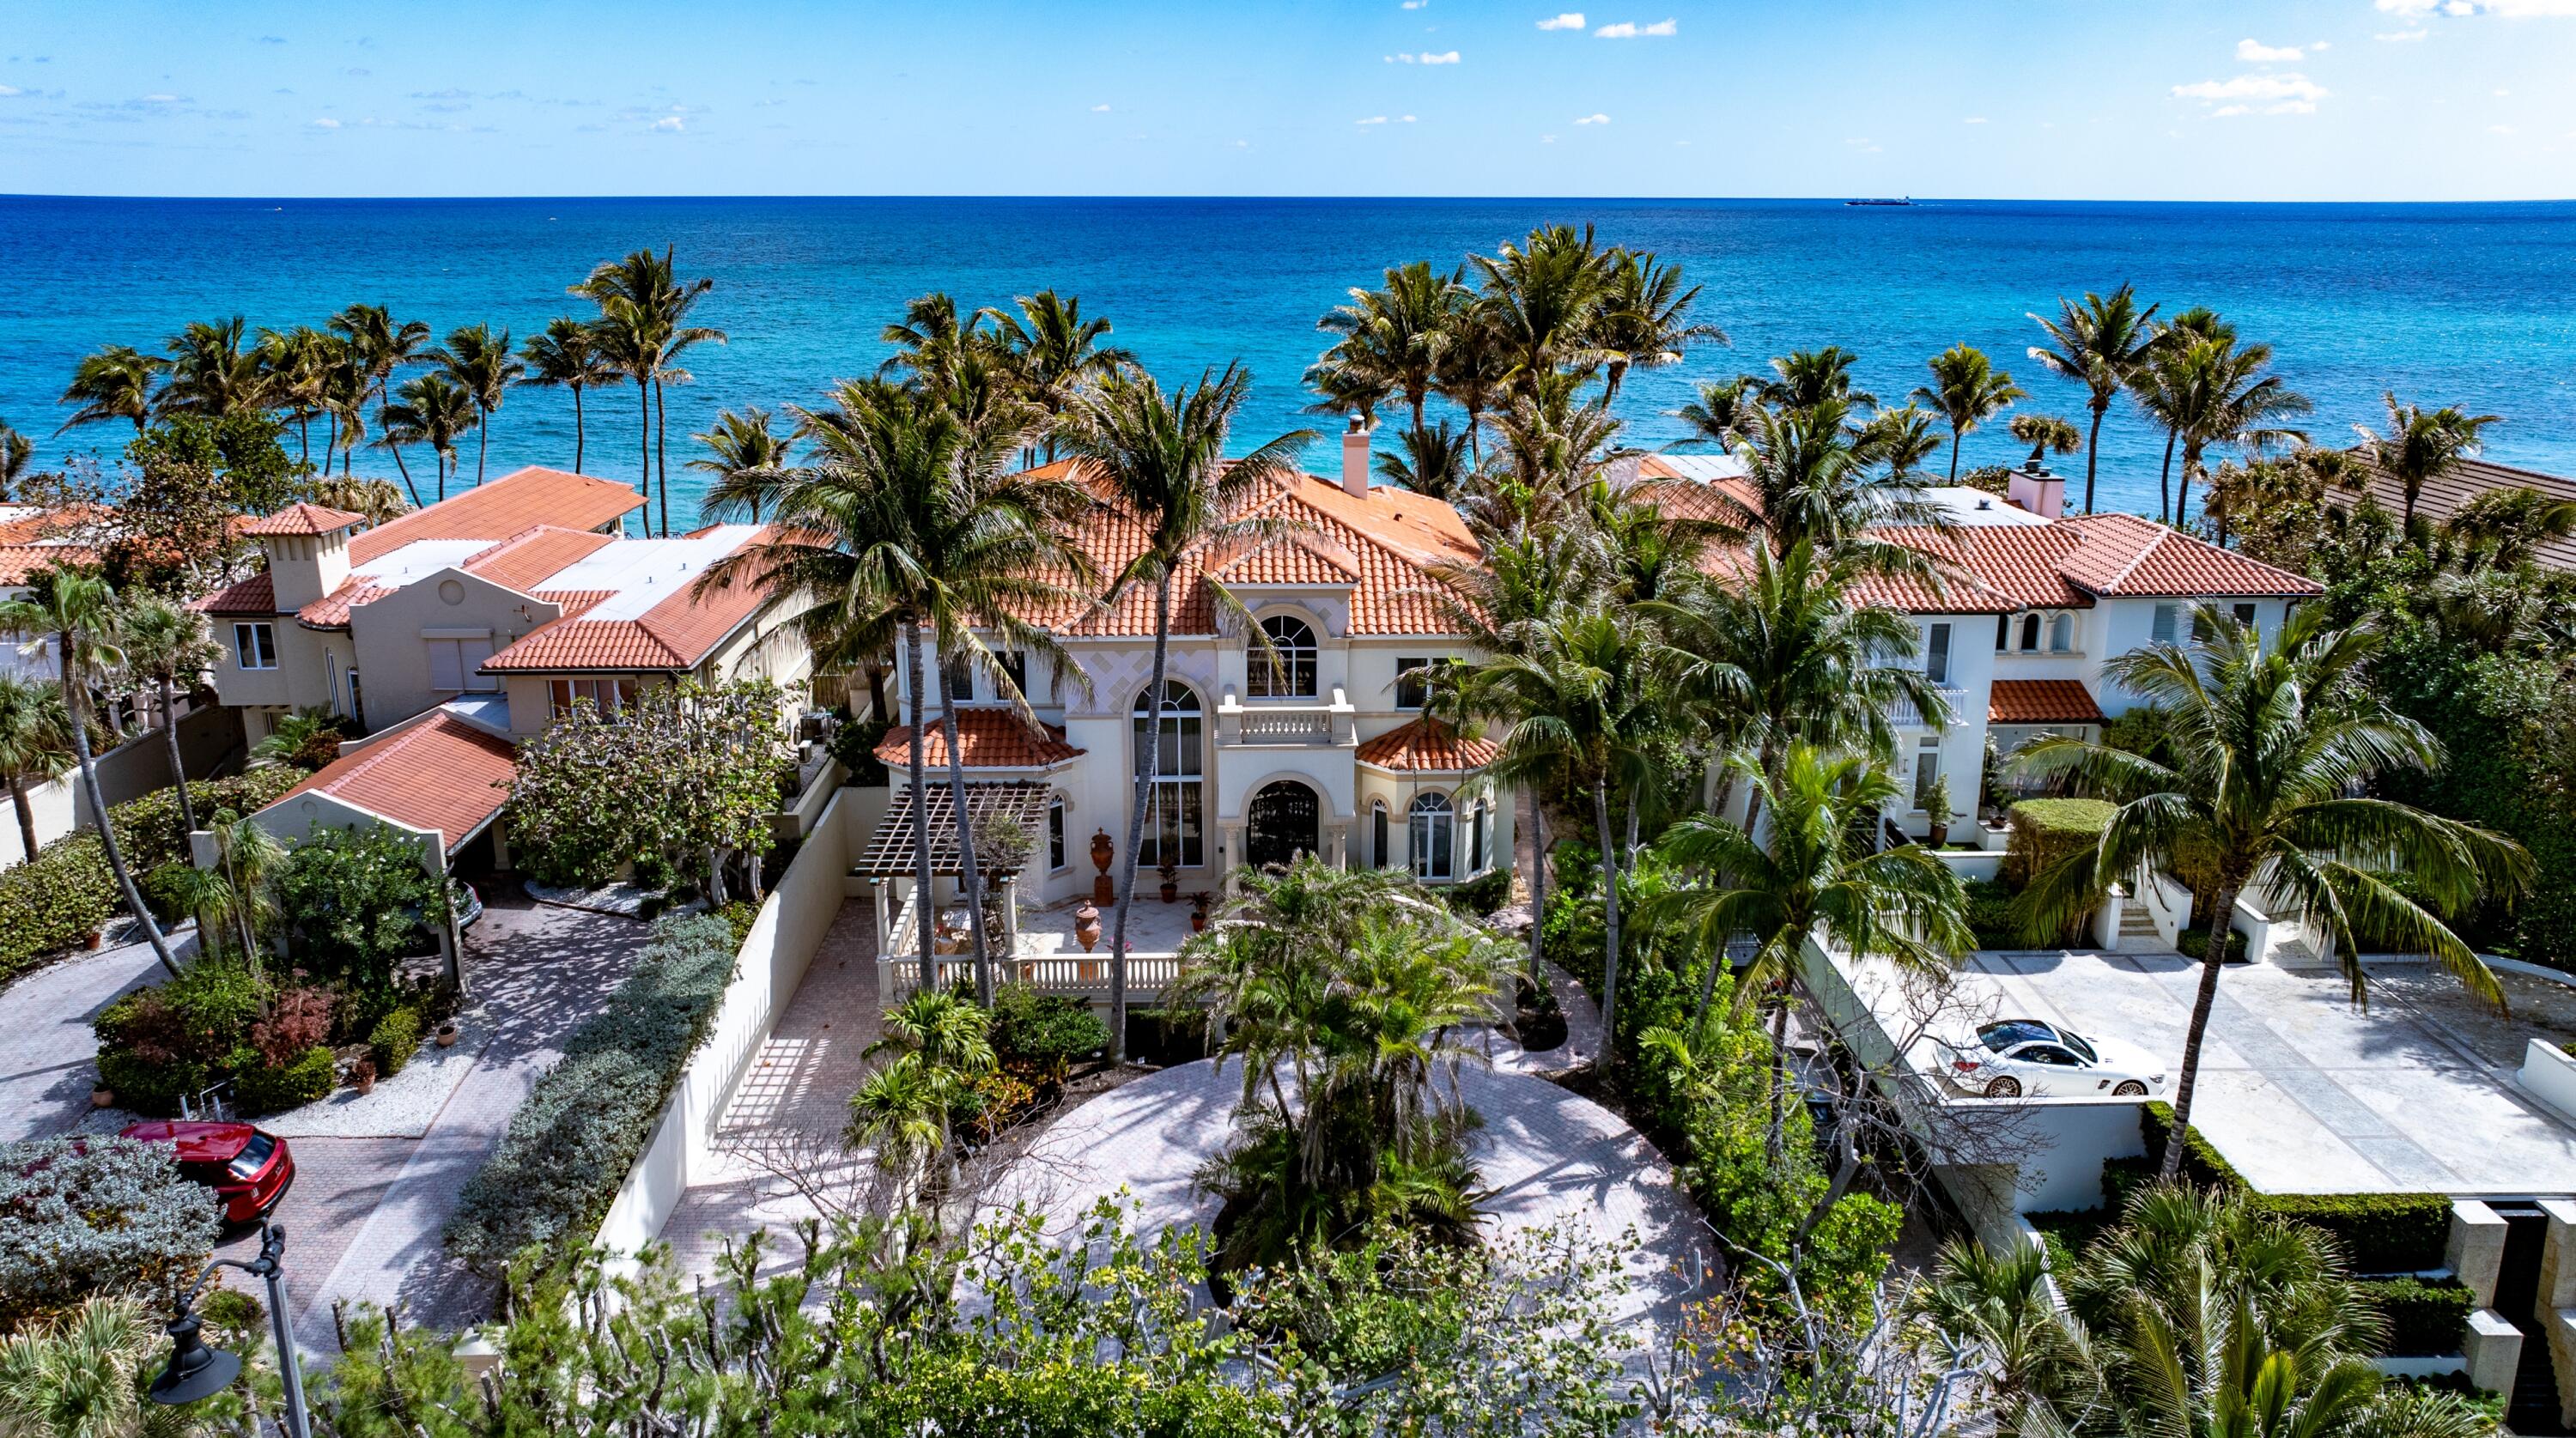 Property for Sale at 3 Ocean Lane, Manalapan, Palm Beach County, Florida - Bedrooms: 5 
Bathrooms: 6.5  - $22,950,000